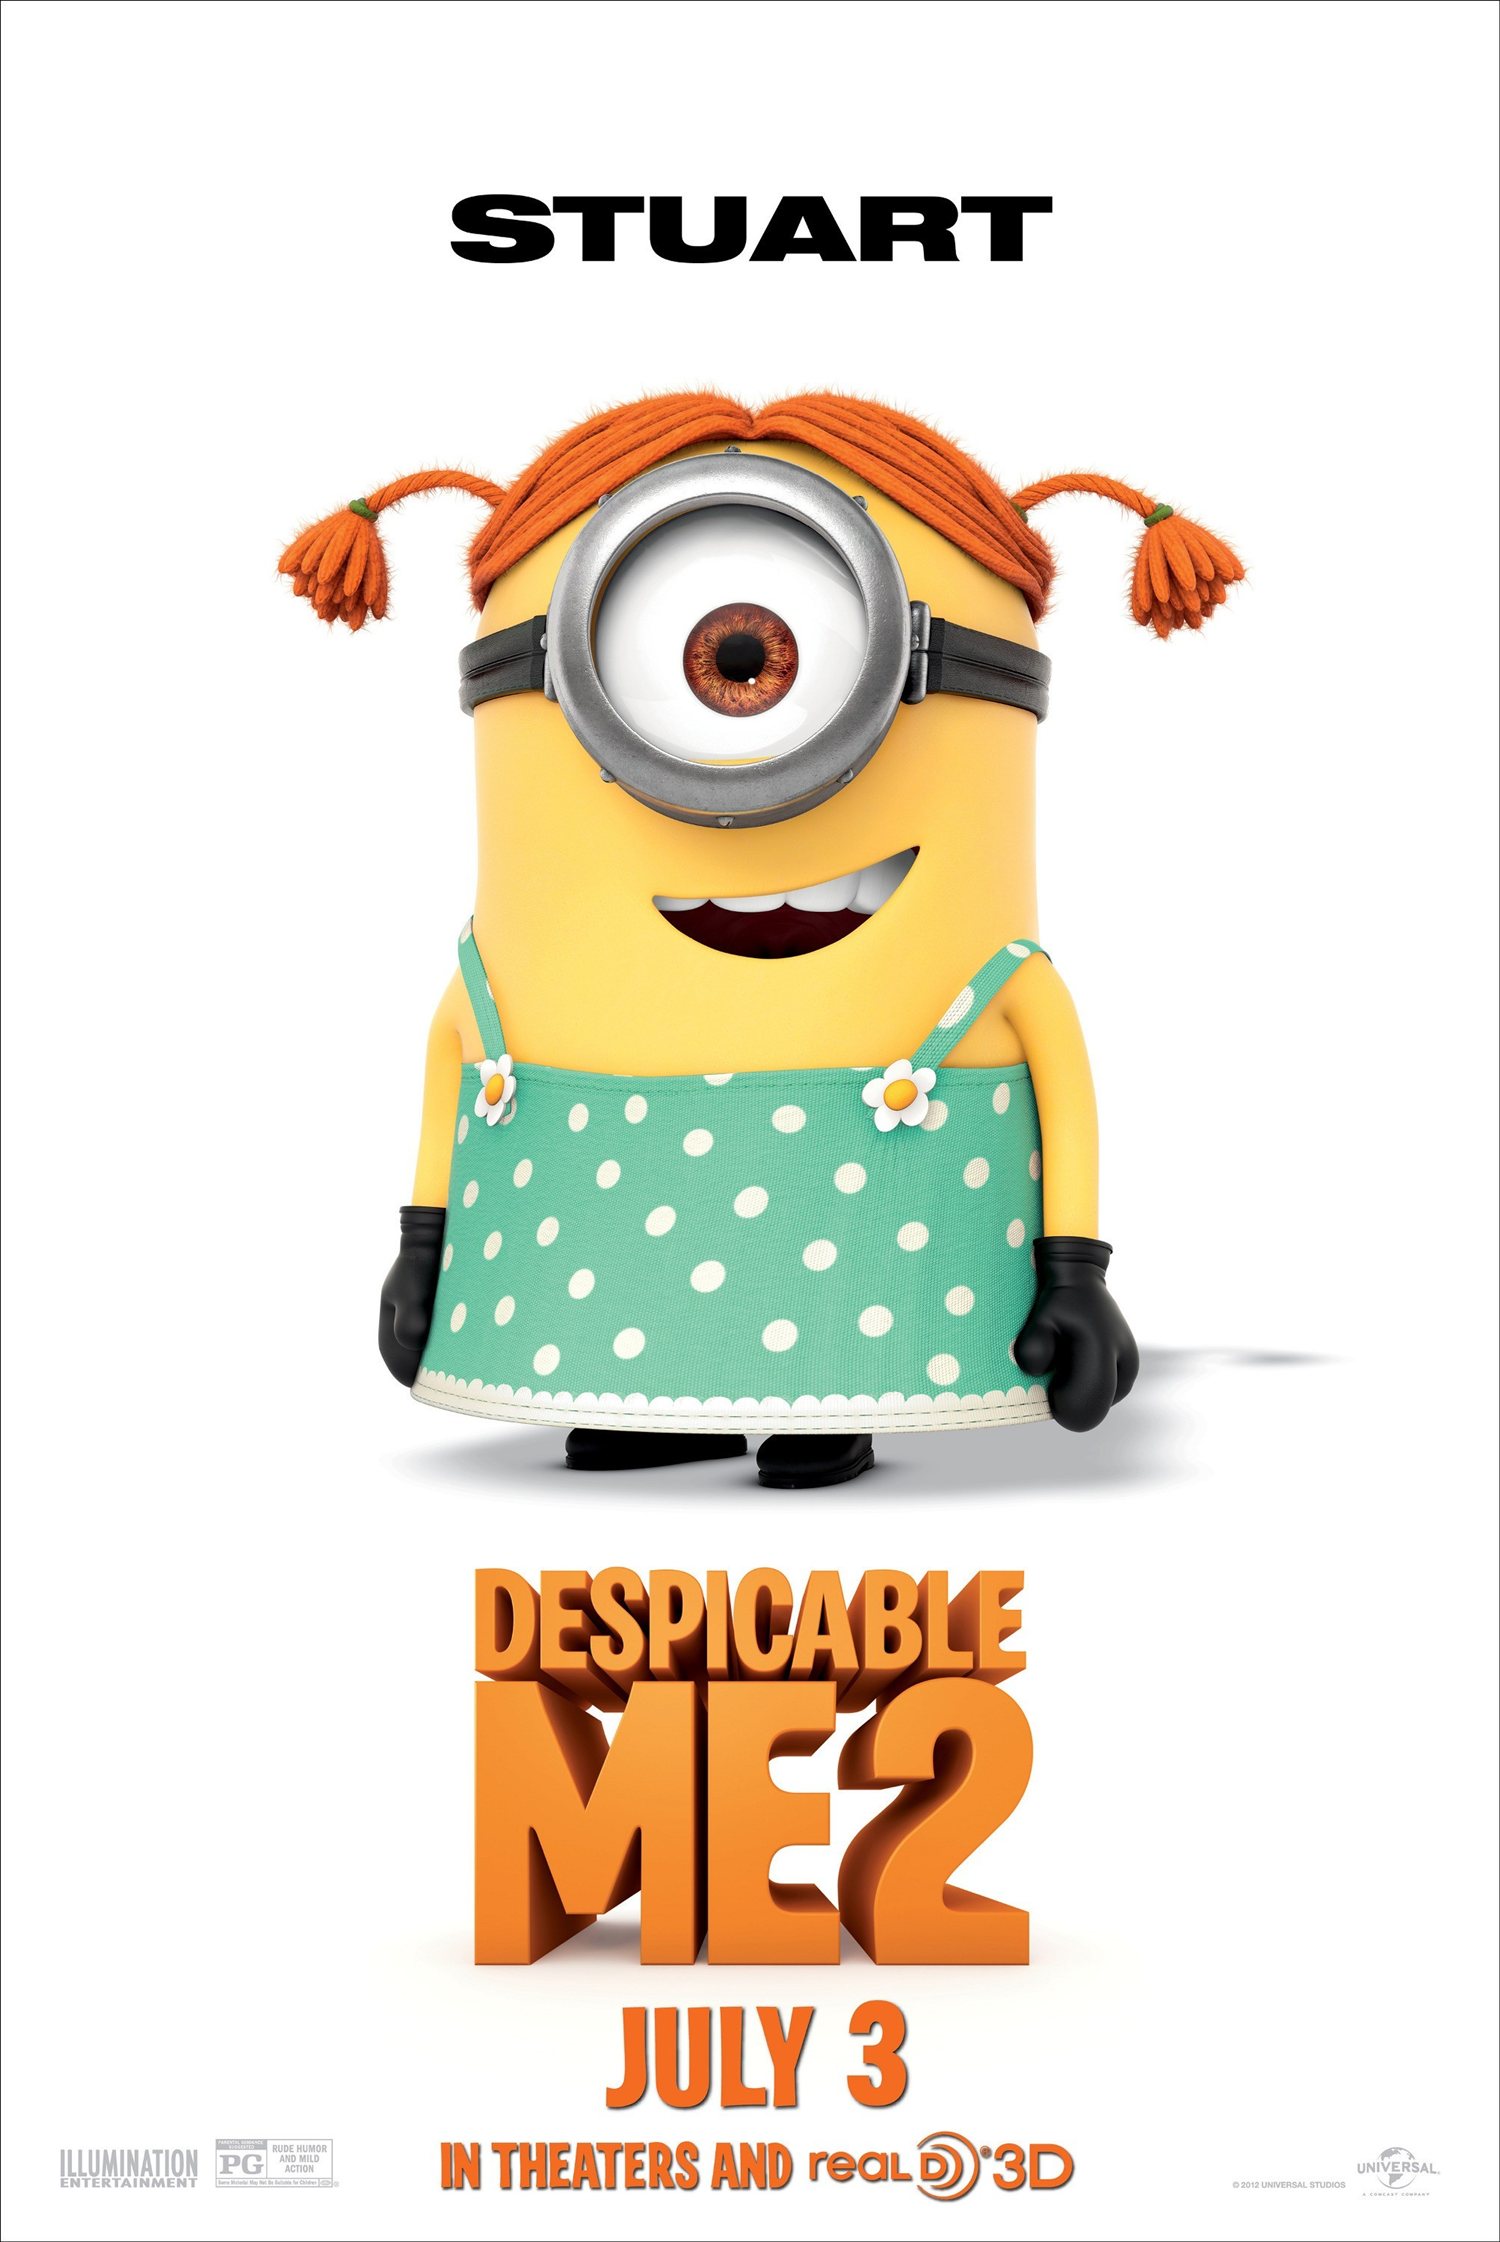 Minions/Gallery | Despicable Me Wiki | Fandom powered by Wikia